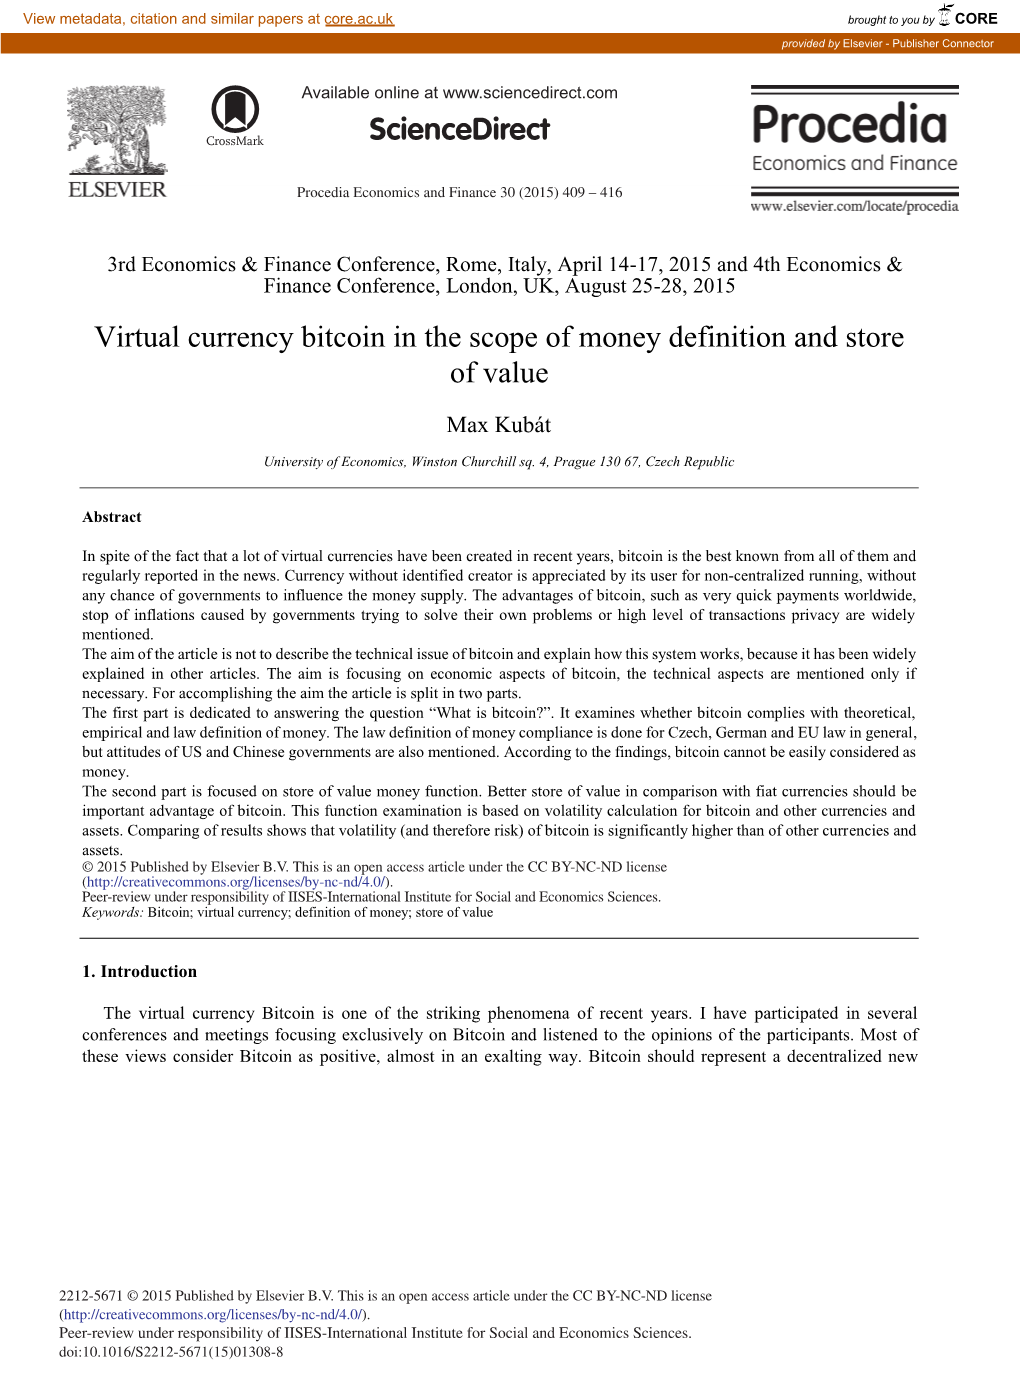 Virtual Currency Bitcoin in the Scope of Money Definition and Store of Value